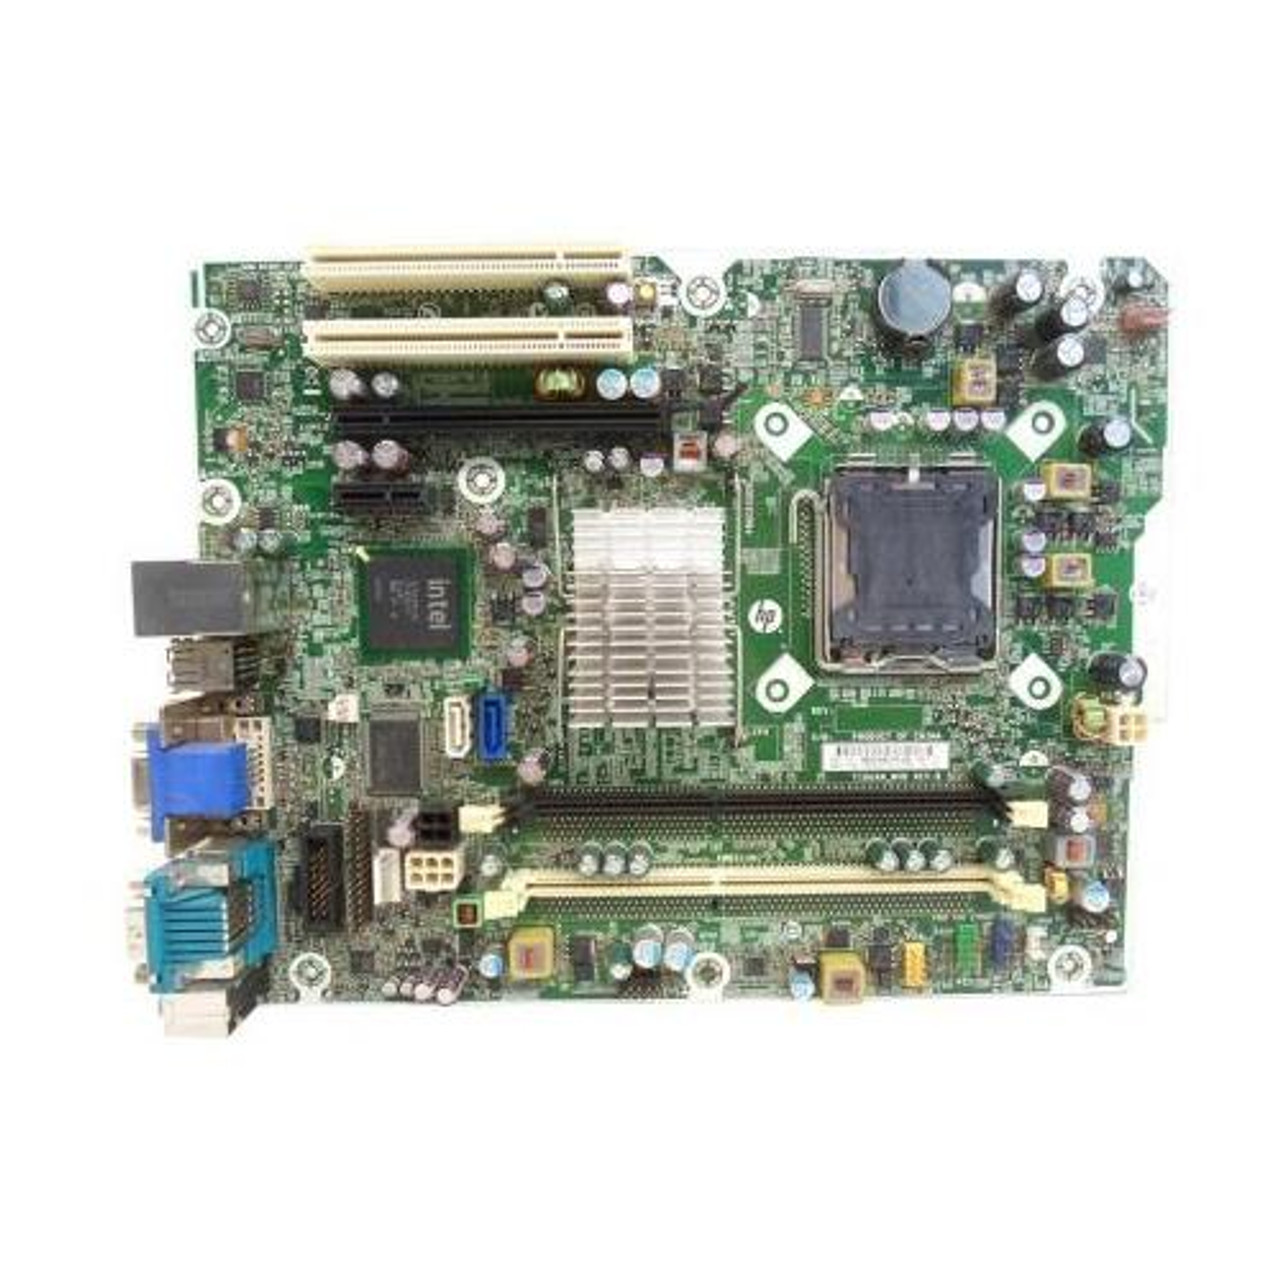 607173 001 Hp System Board Motherboard For Compaq 4000 Pro Small Form Factor Business Pc Refurbished